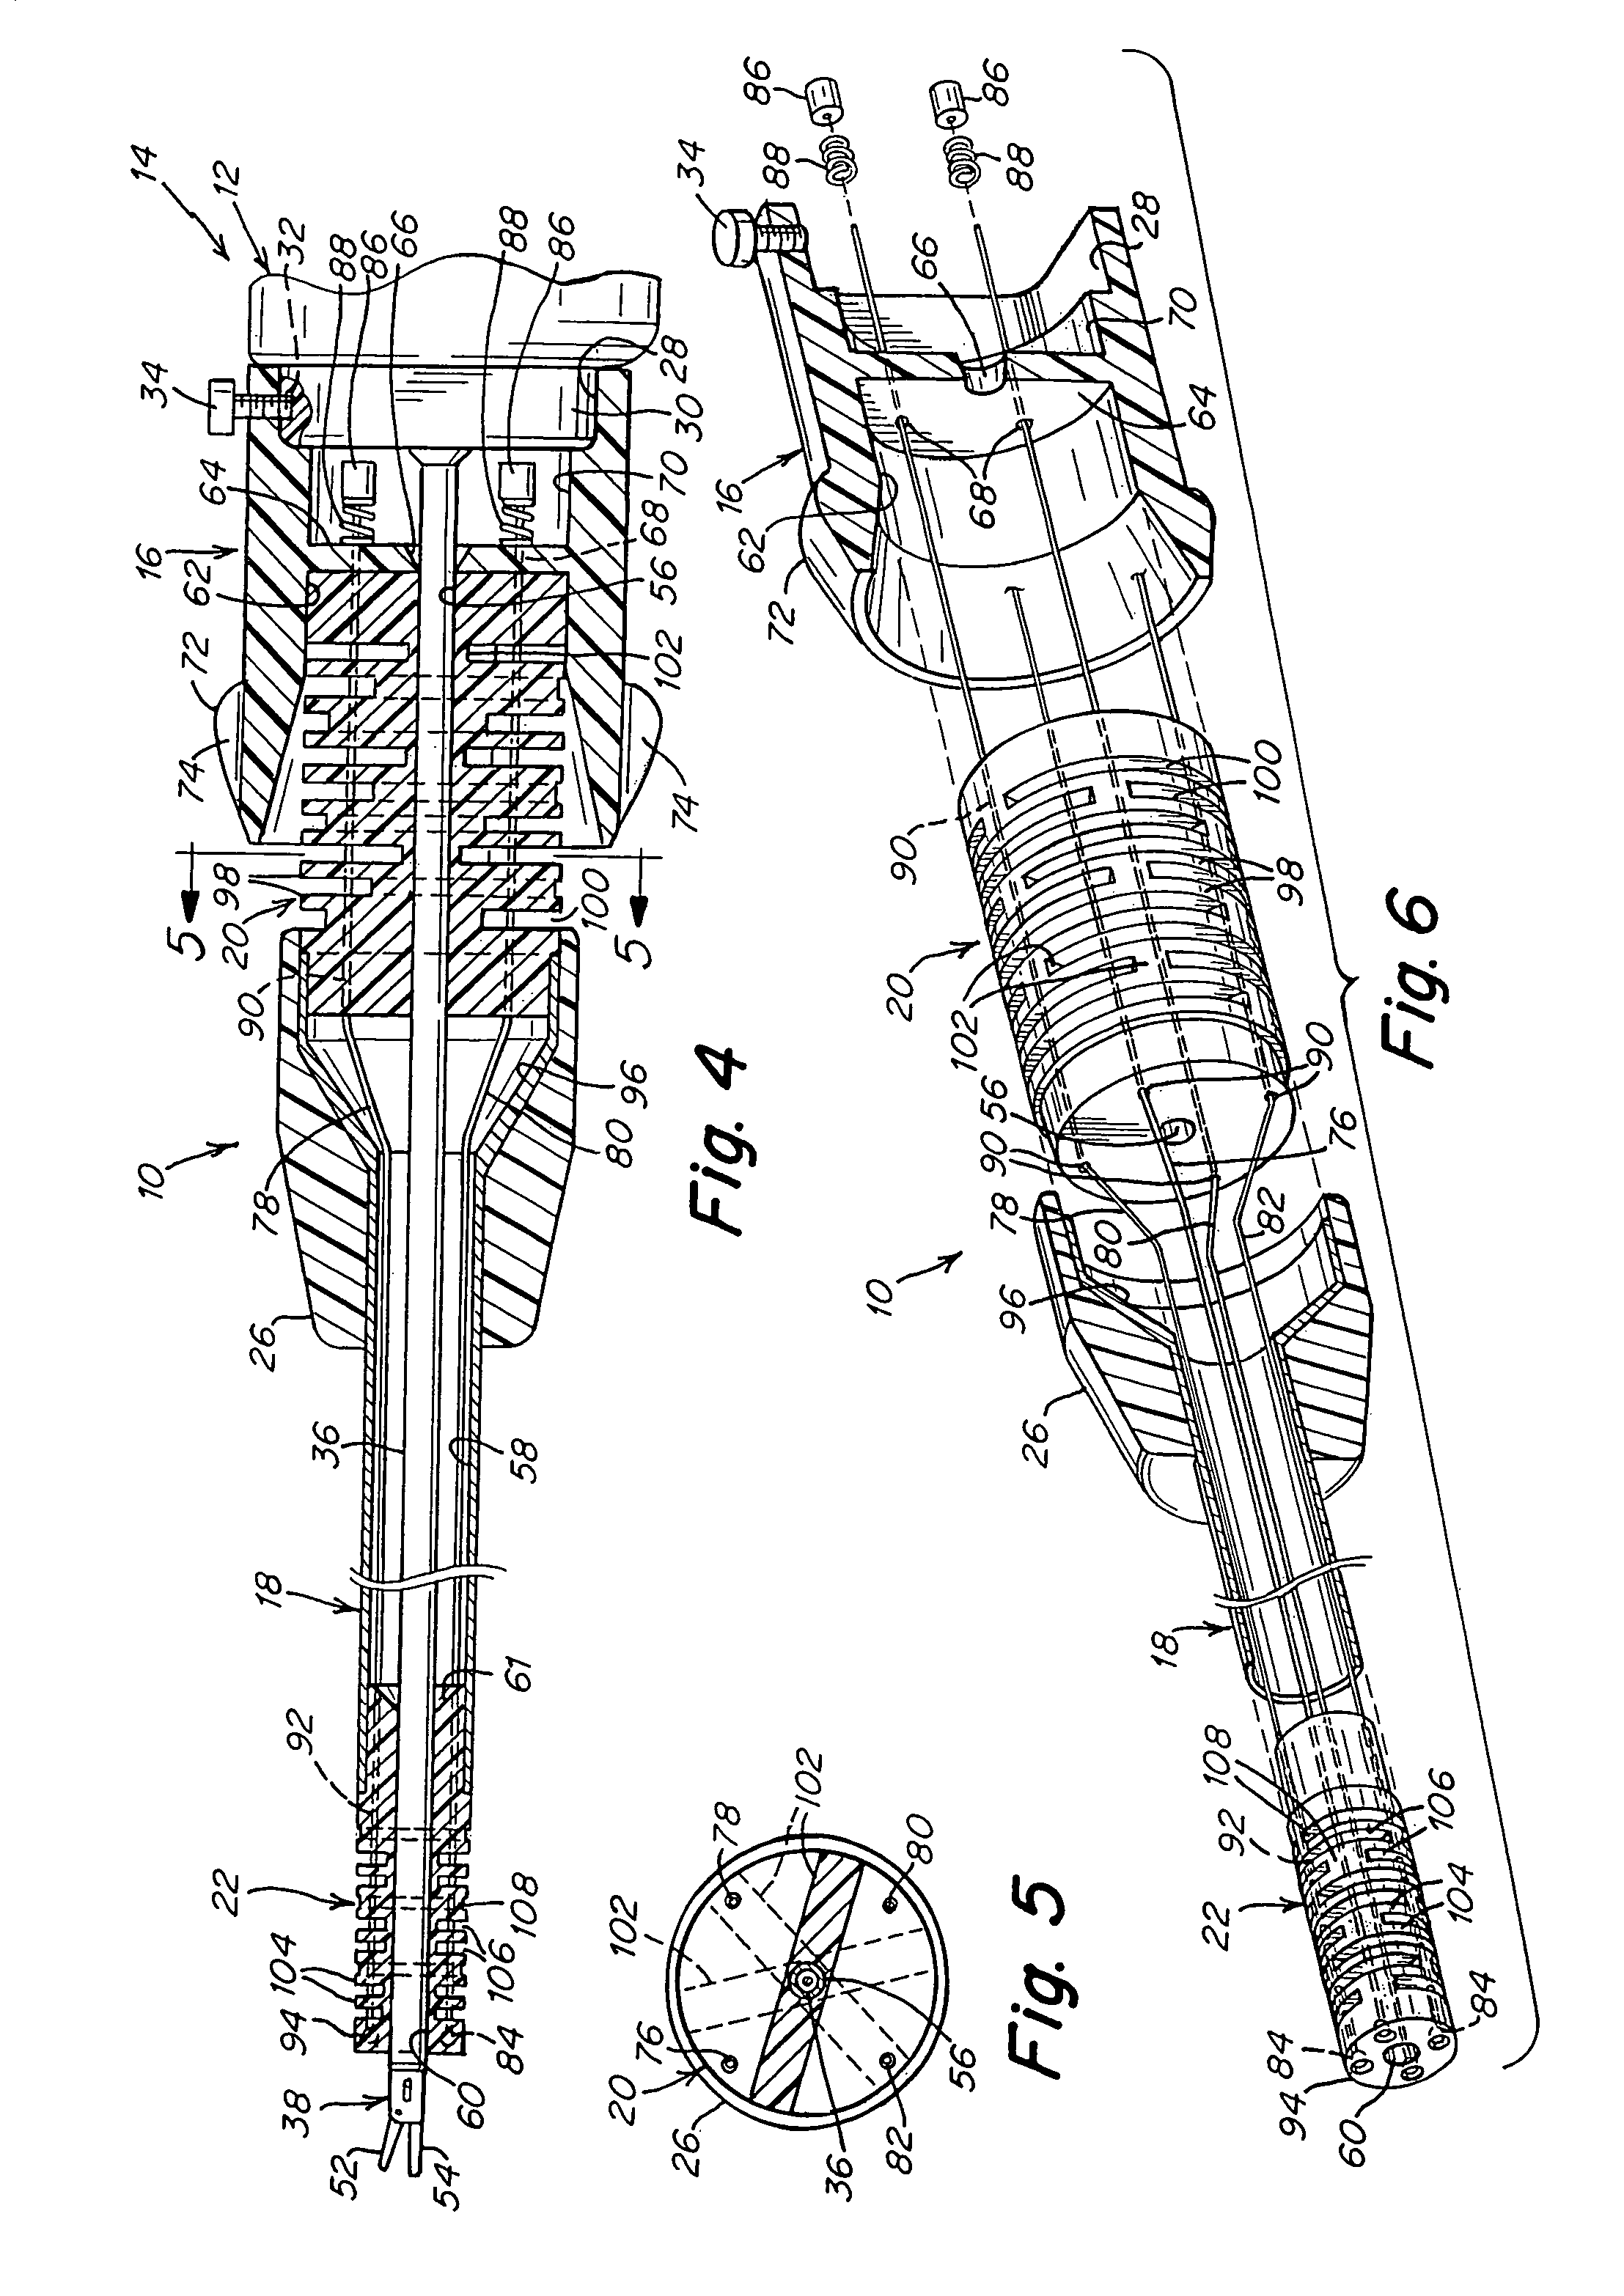 Surgical instrument guide device